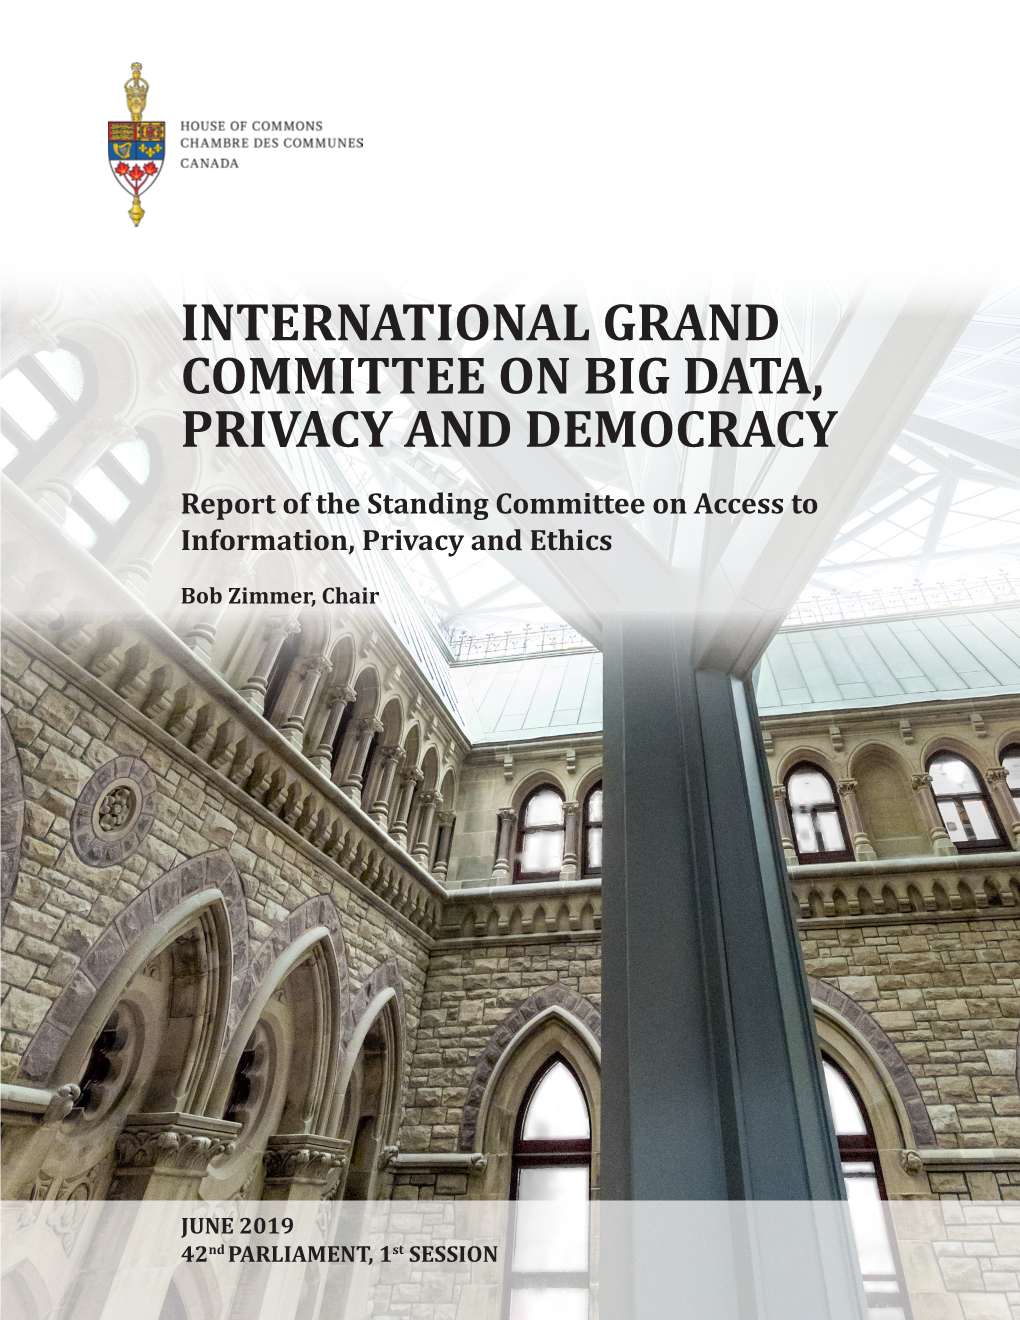 INTERNATIONAL GRAND COMMITTEE on BIG DATA, PRIVACY and DEMOCRACY Report of the Standing Committee on Access to Information, Privacy and Ethics